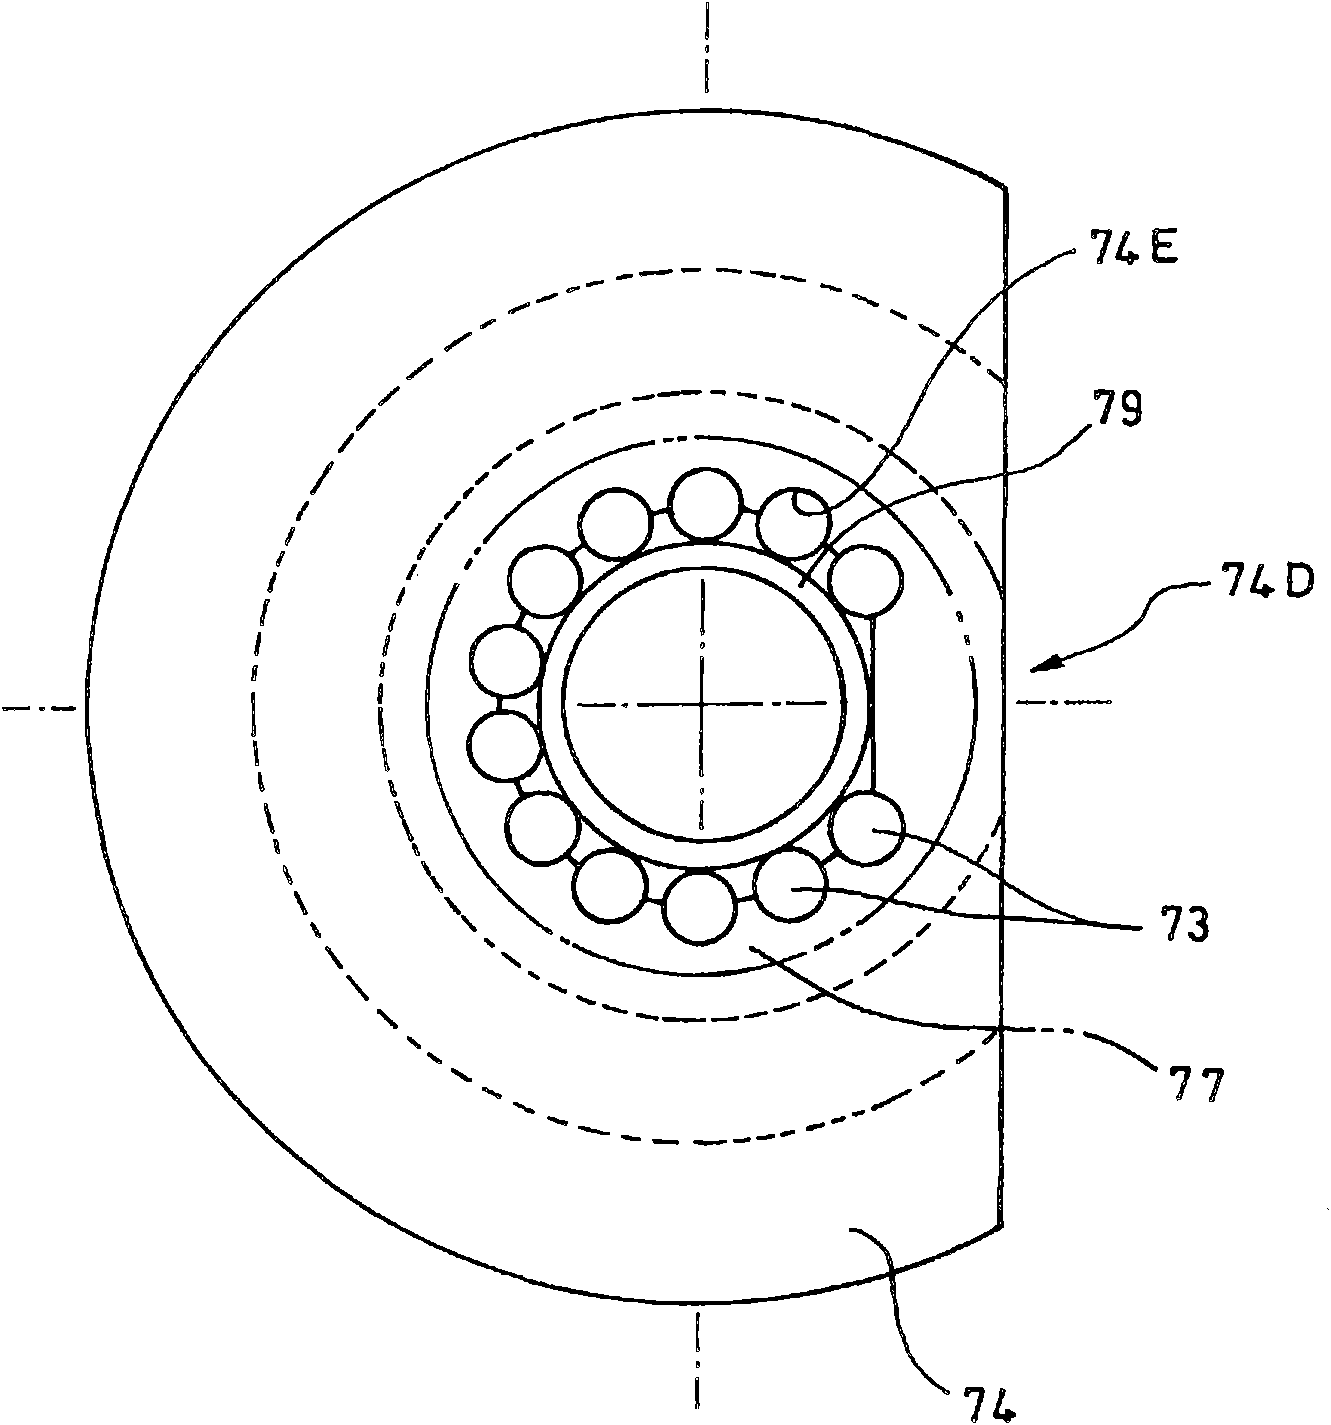 Decelerator with output pinion of wind power generation system